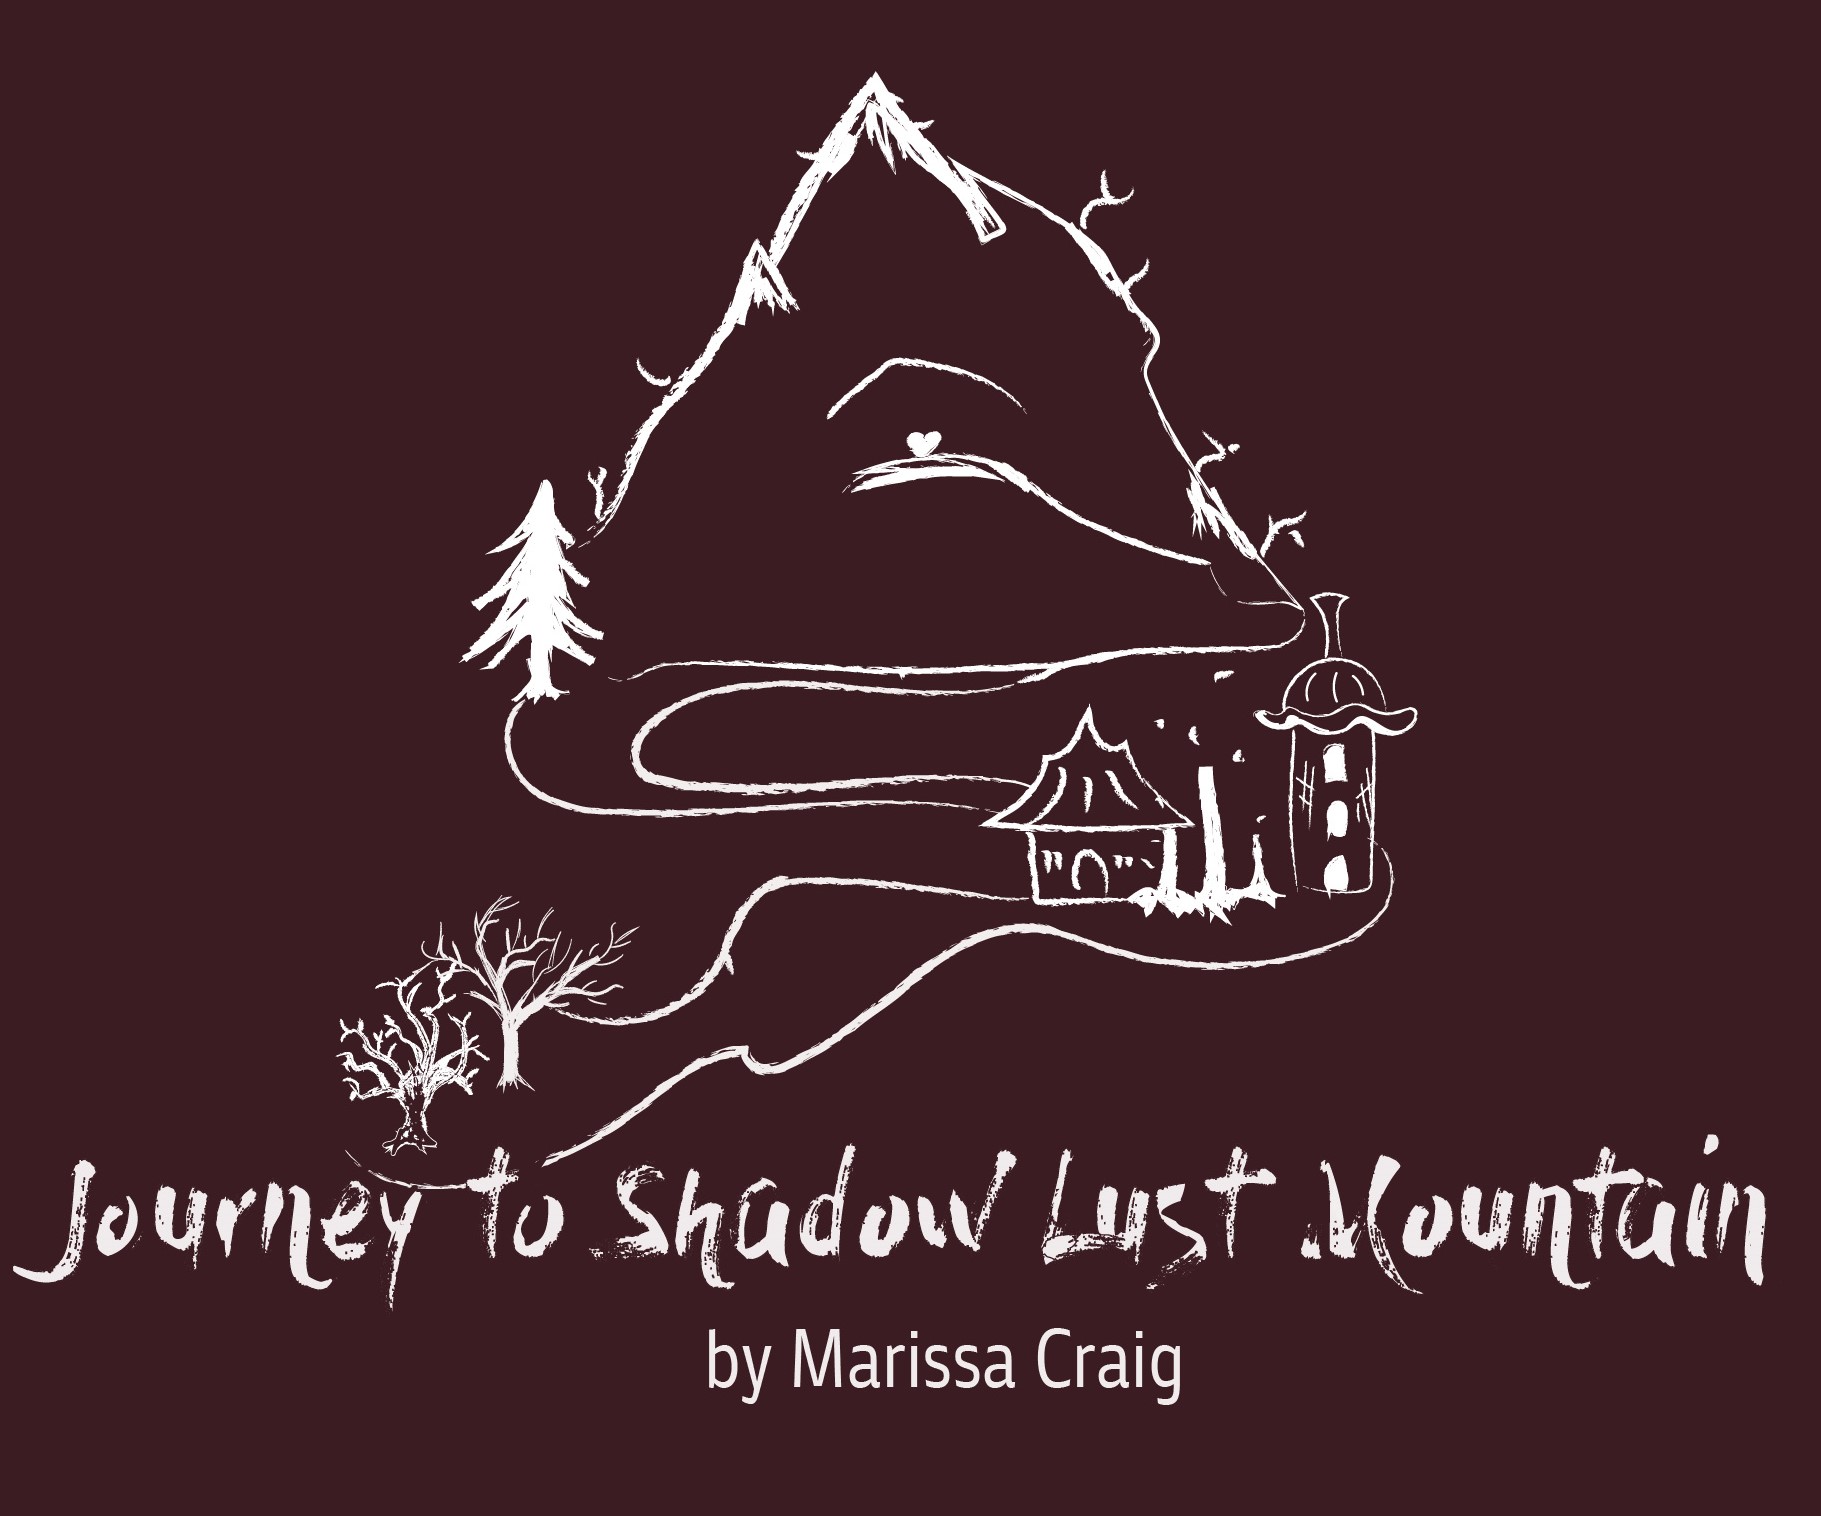 Journey to Shadow Lust Mountain